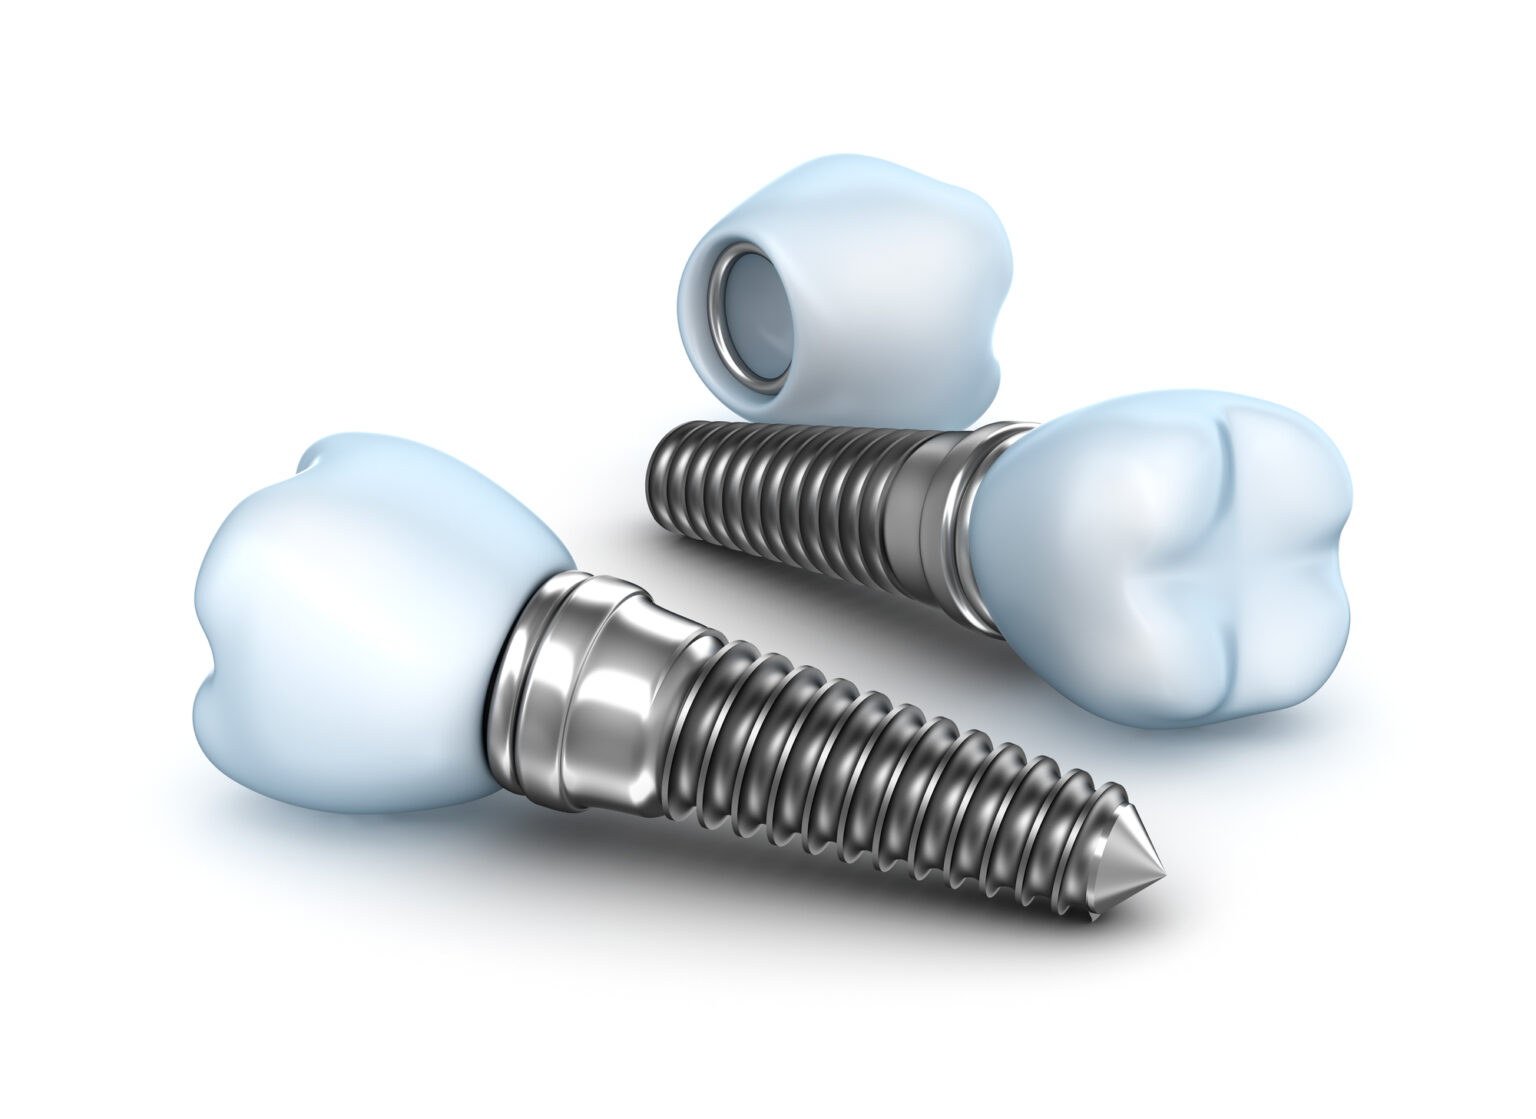 Three dental implants of different parts and stages on a white background in a Texas dentistry office.